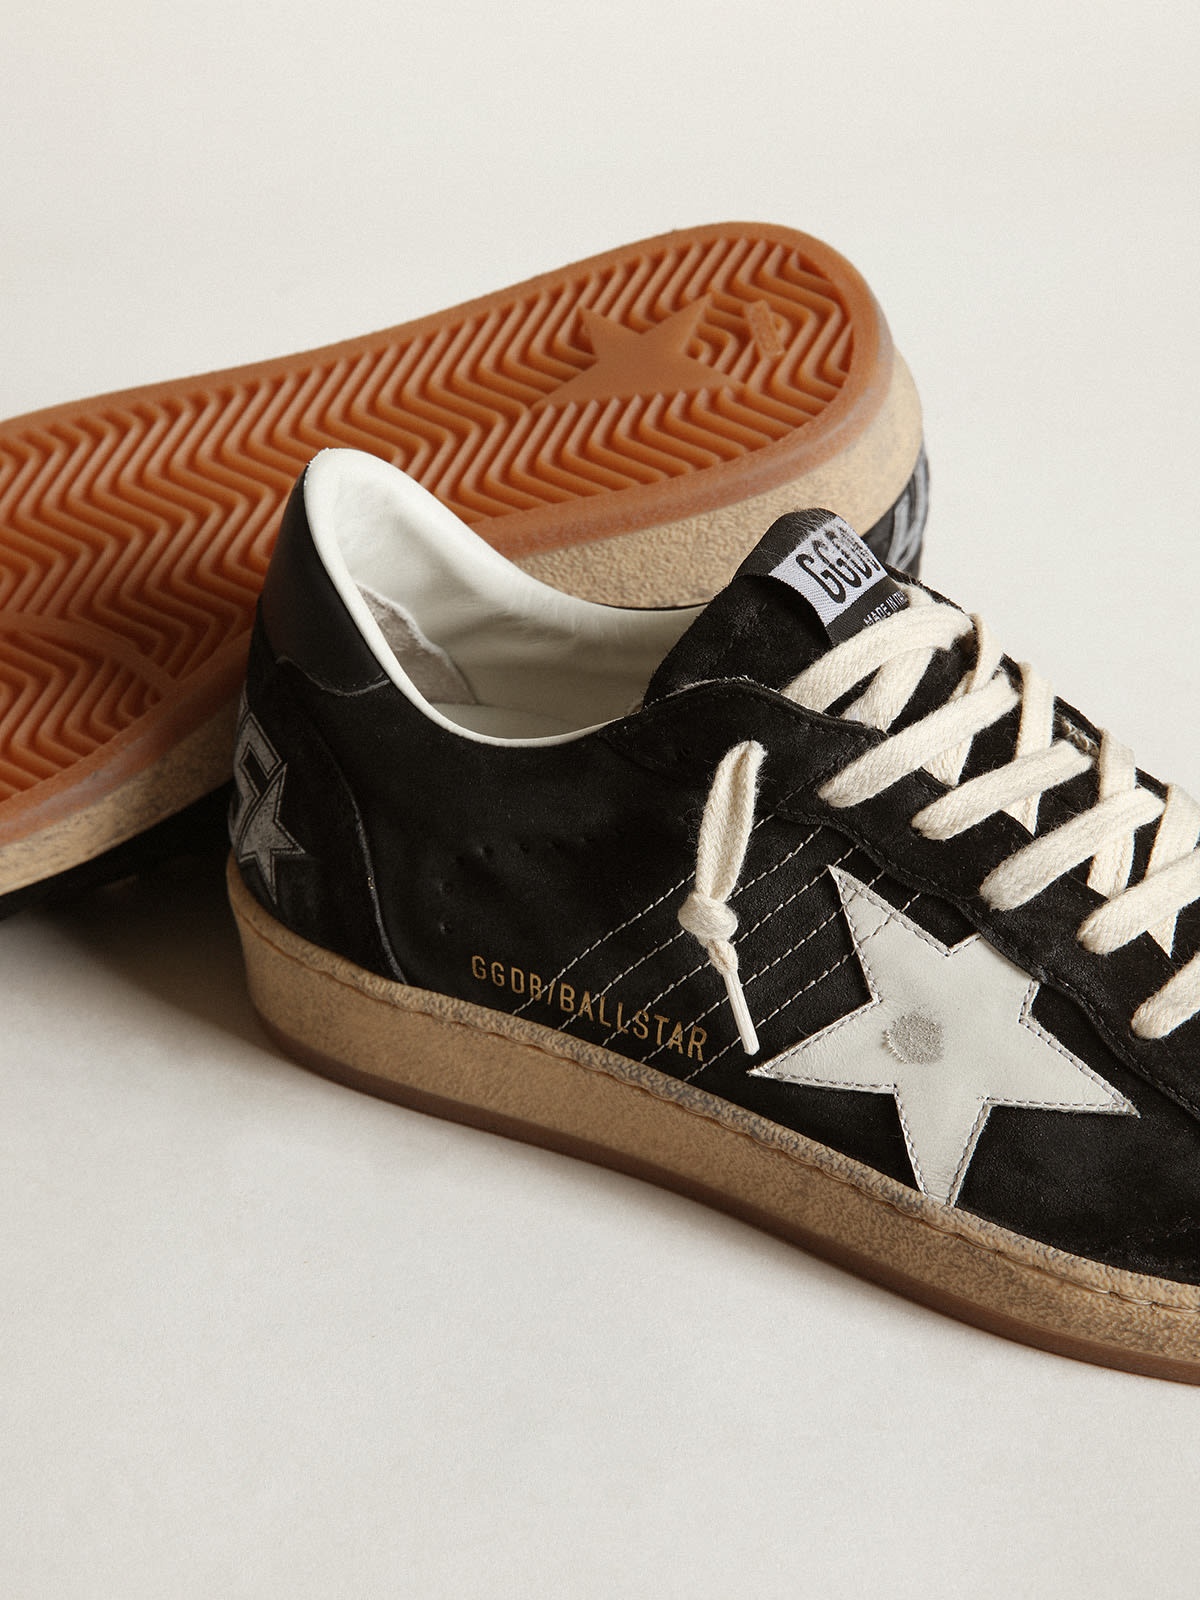 Women’s Ball Star sneakers in black suede with white leather star and black leather heel tab - 3